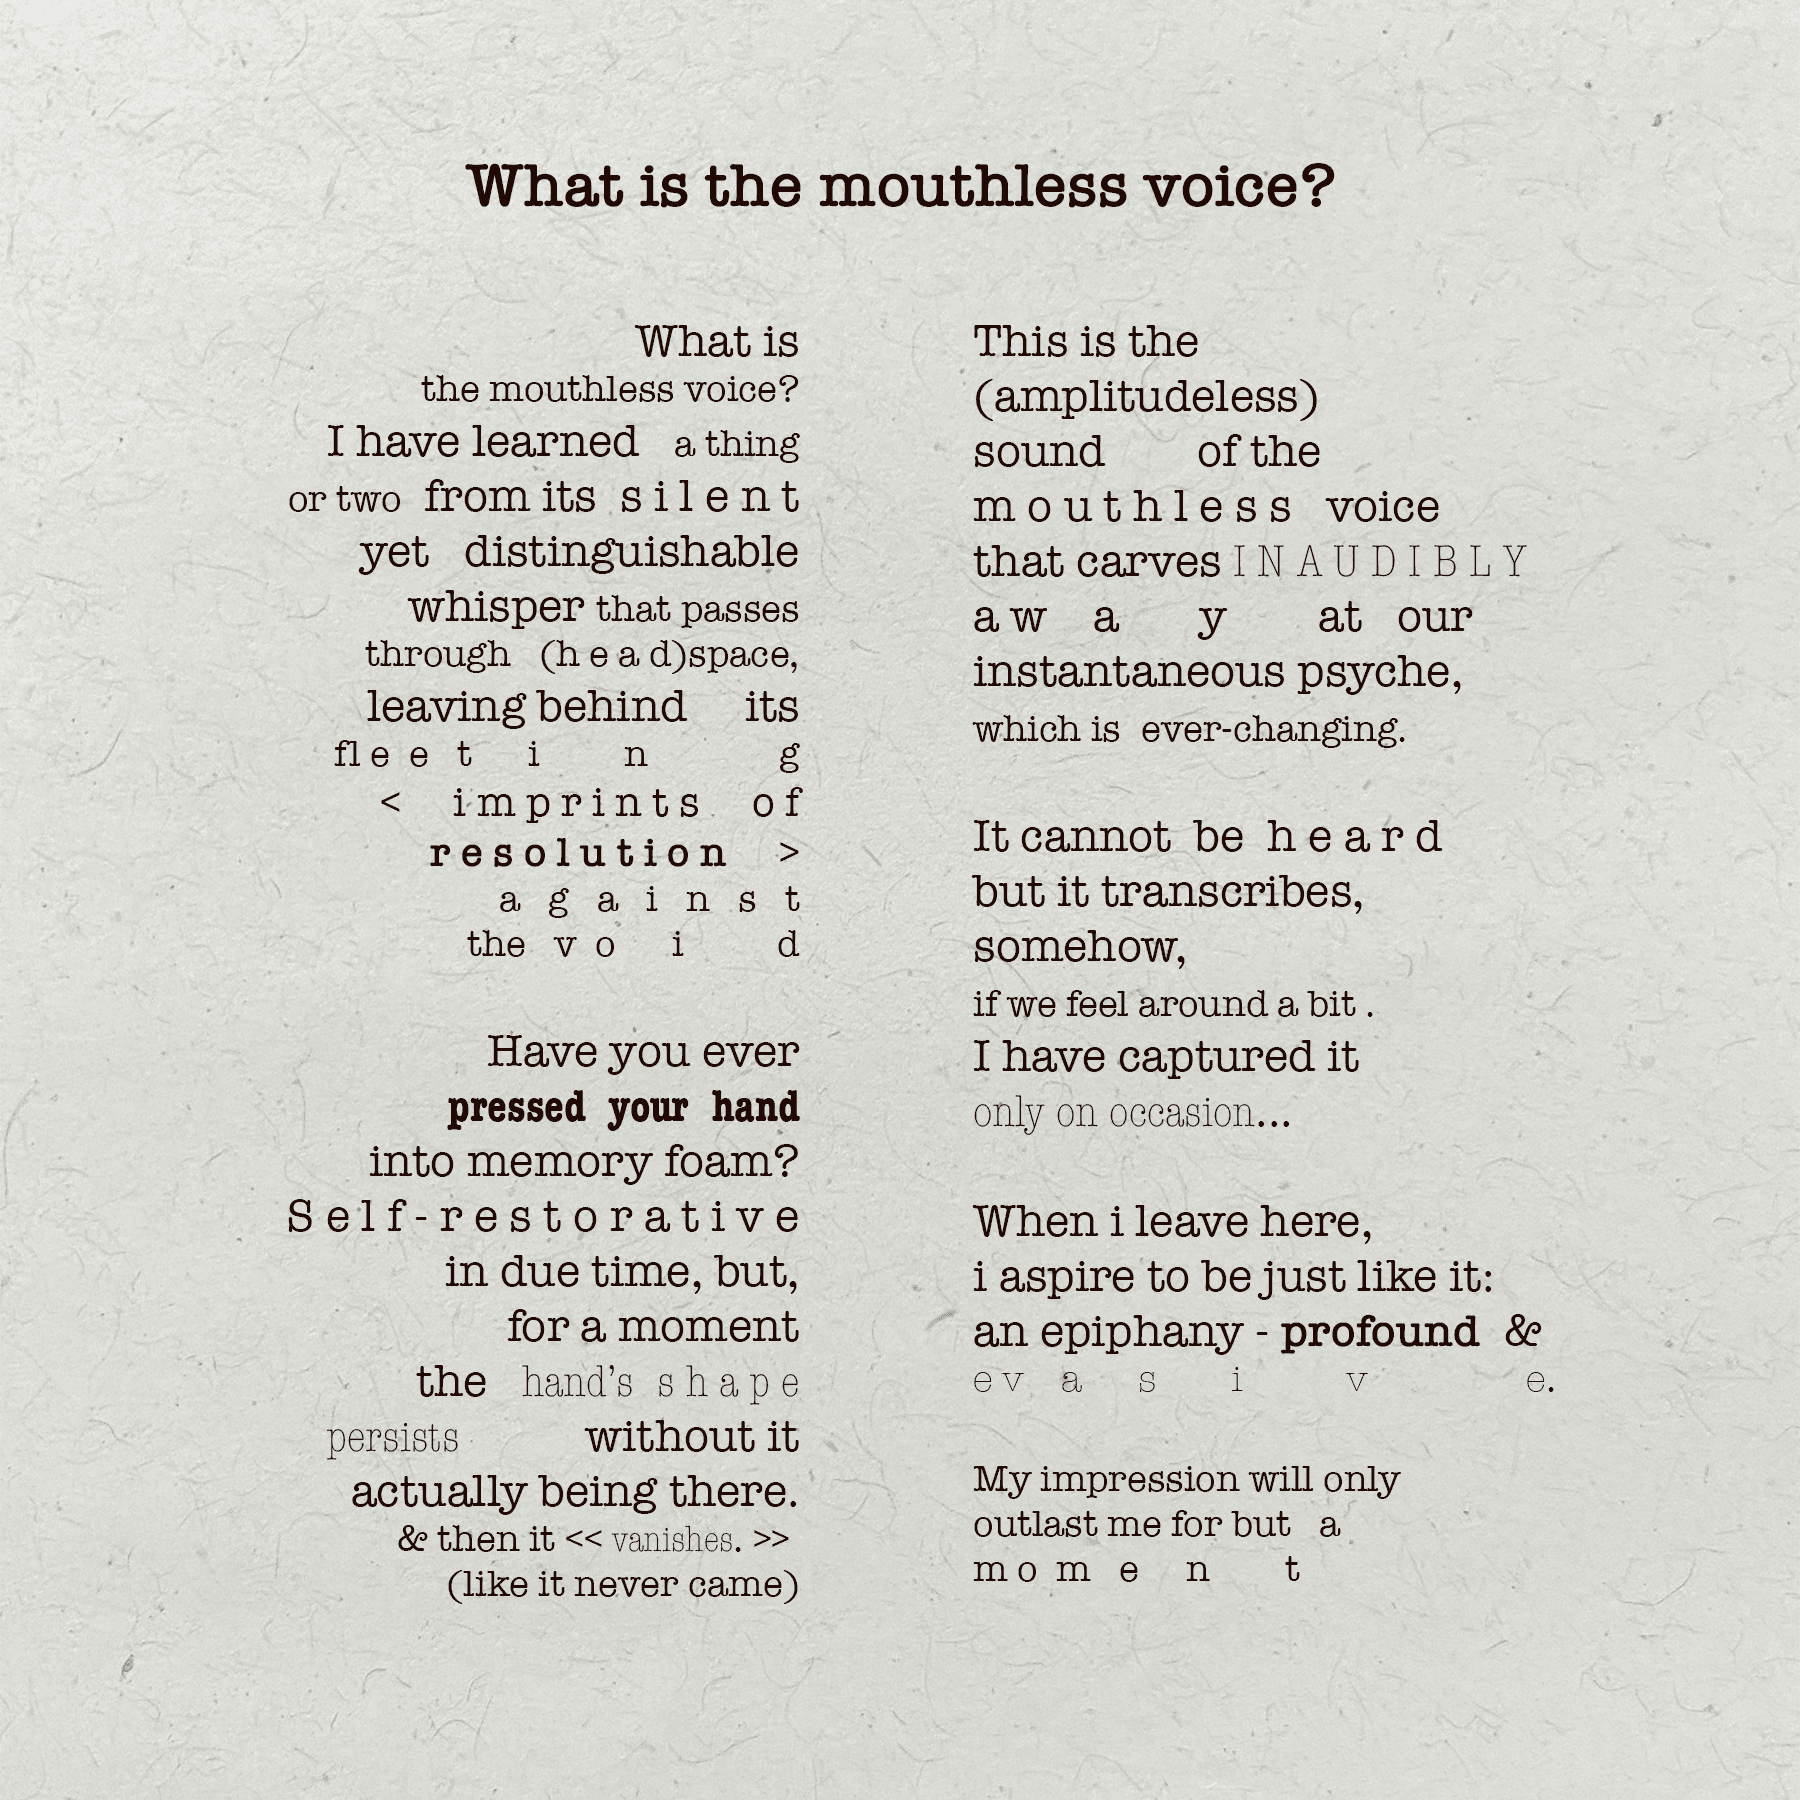 the mouthless voice